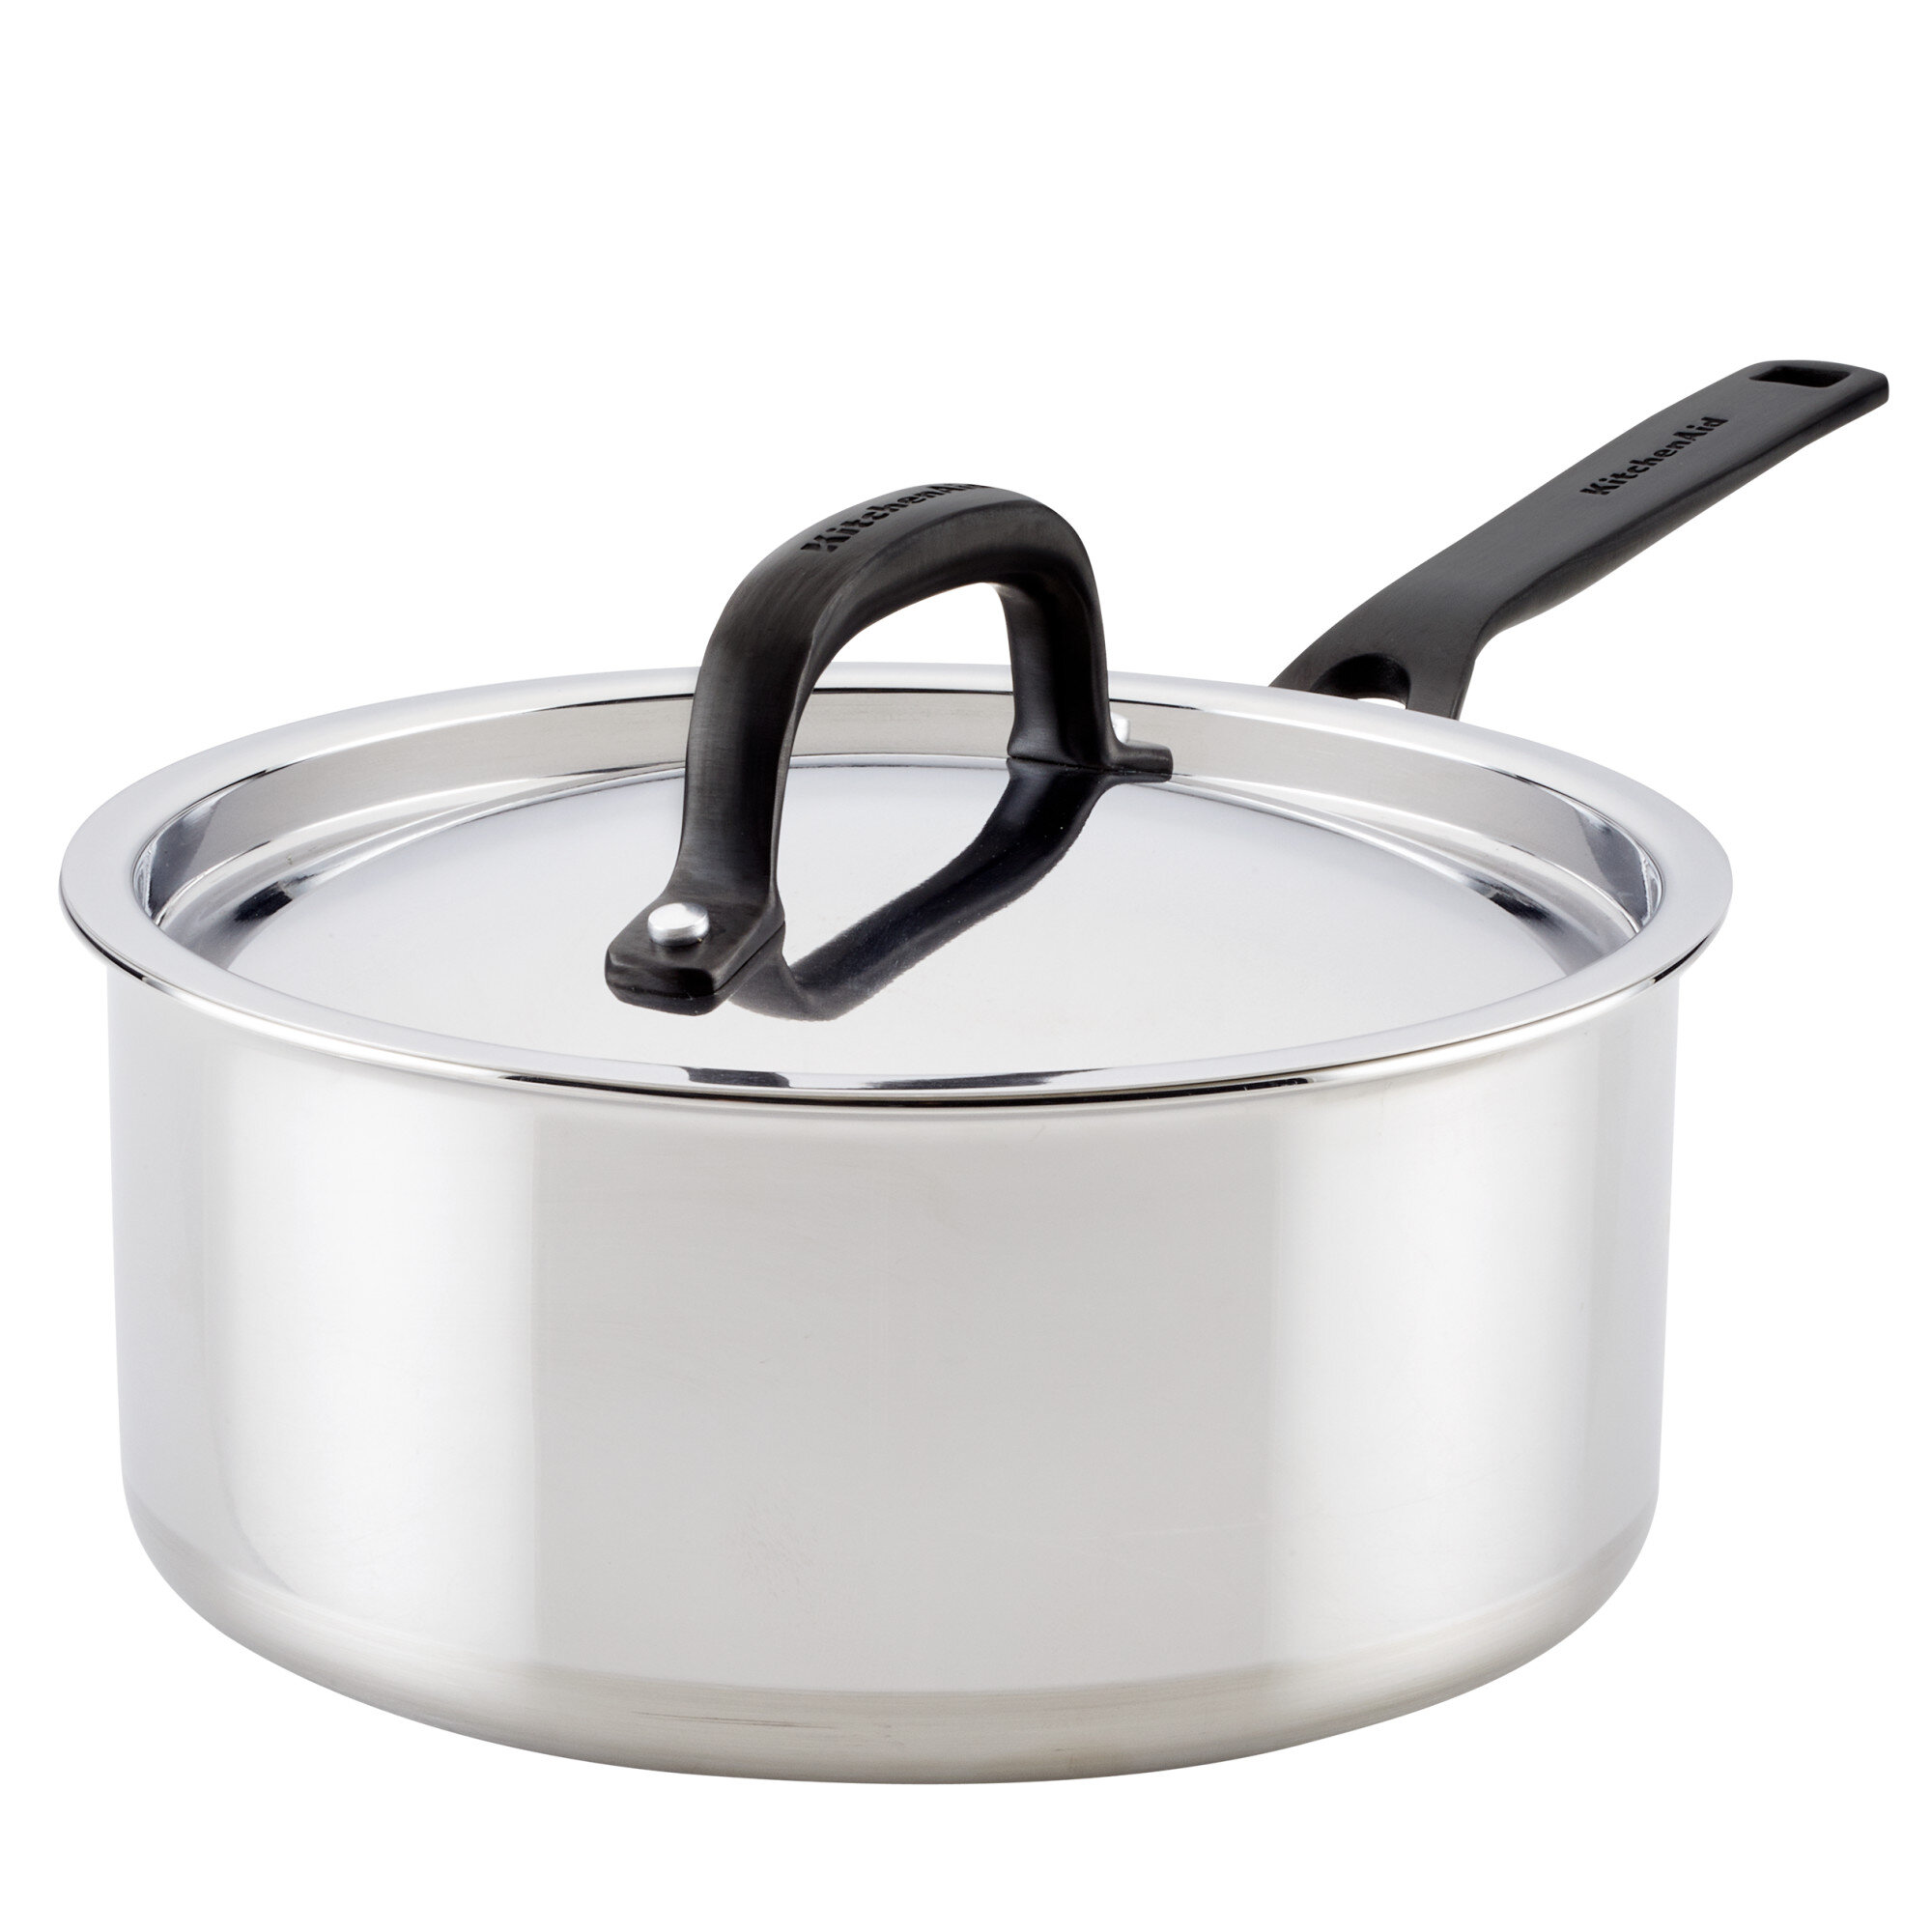 Kitchenaid 5-Ply Clad Stainless Steel Stockpot With Lid, 8-Quart, Polished Stainless  Steel & Reviews